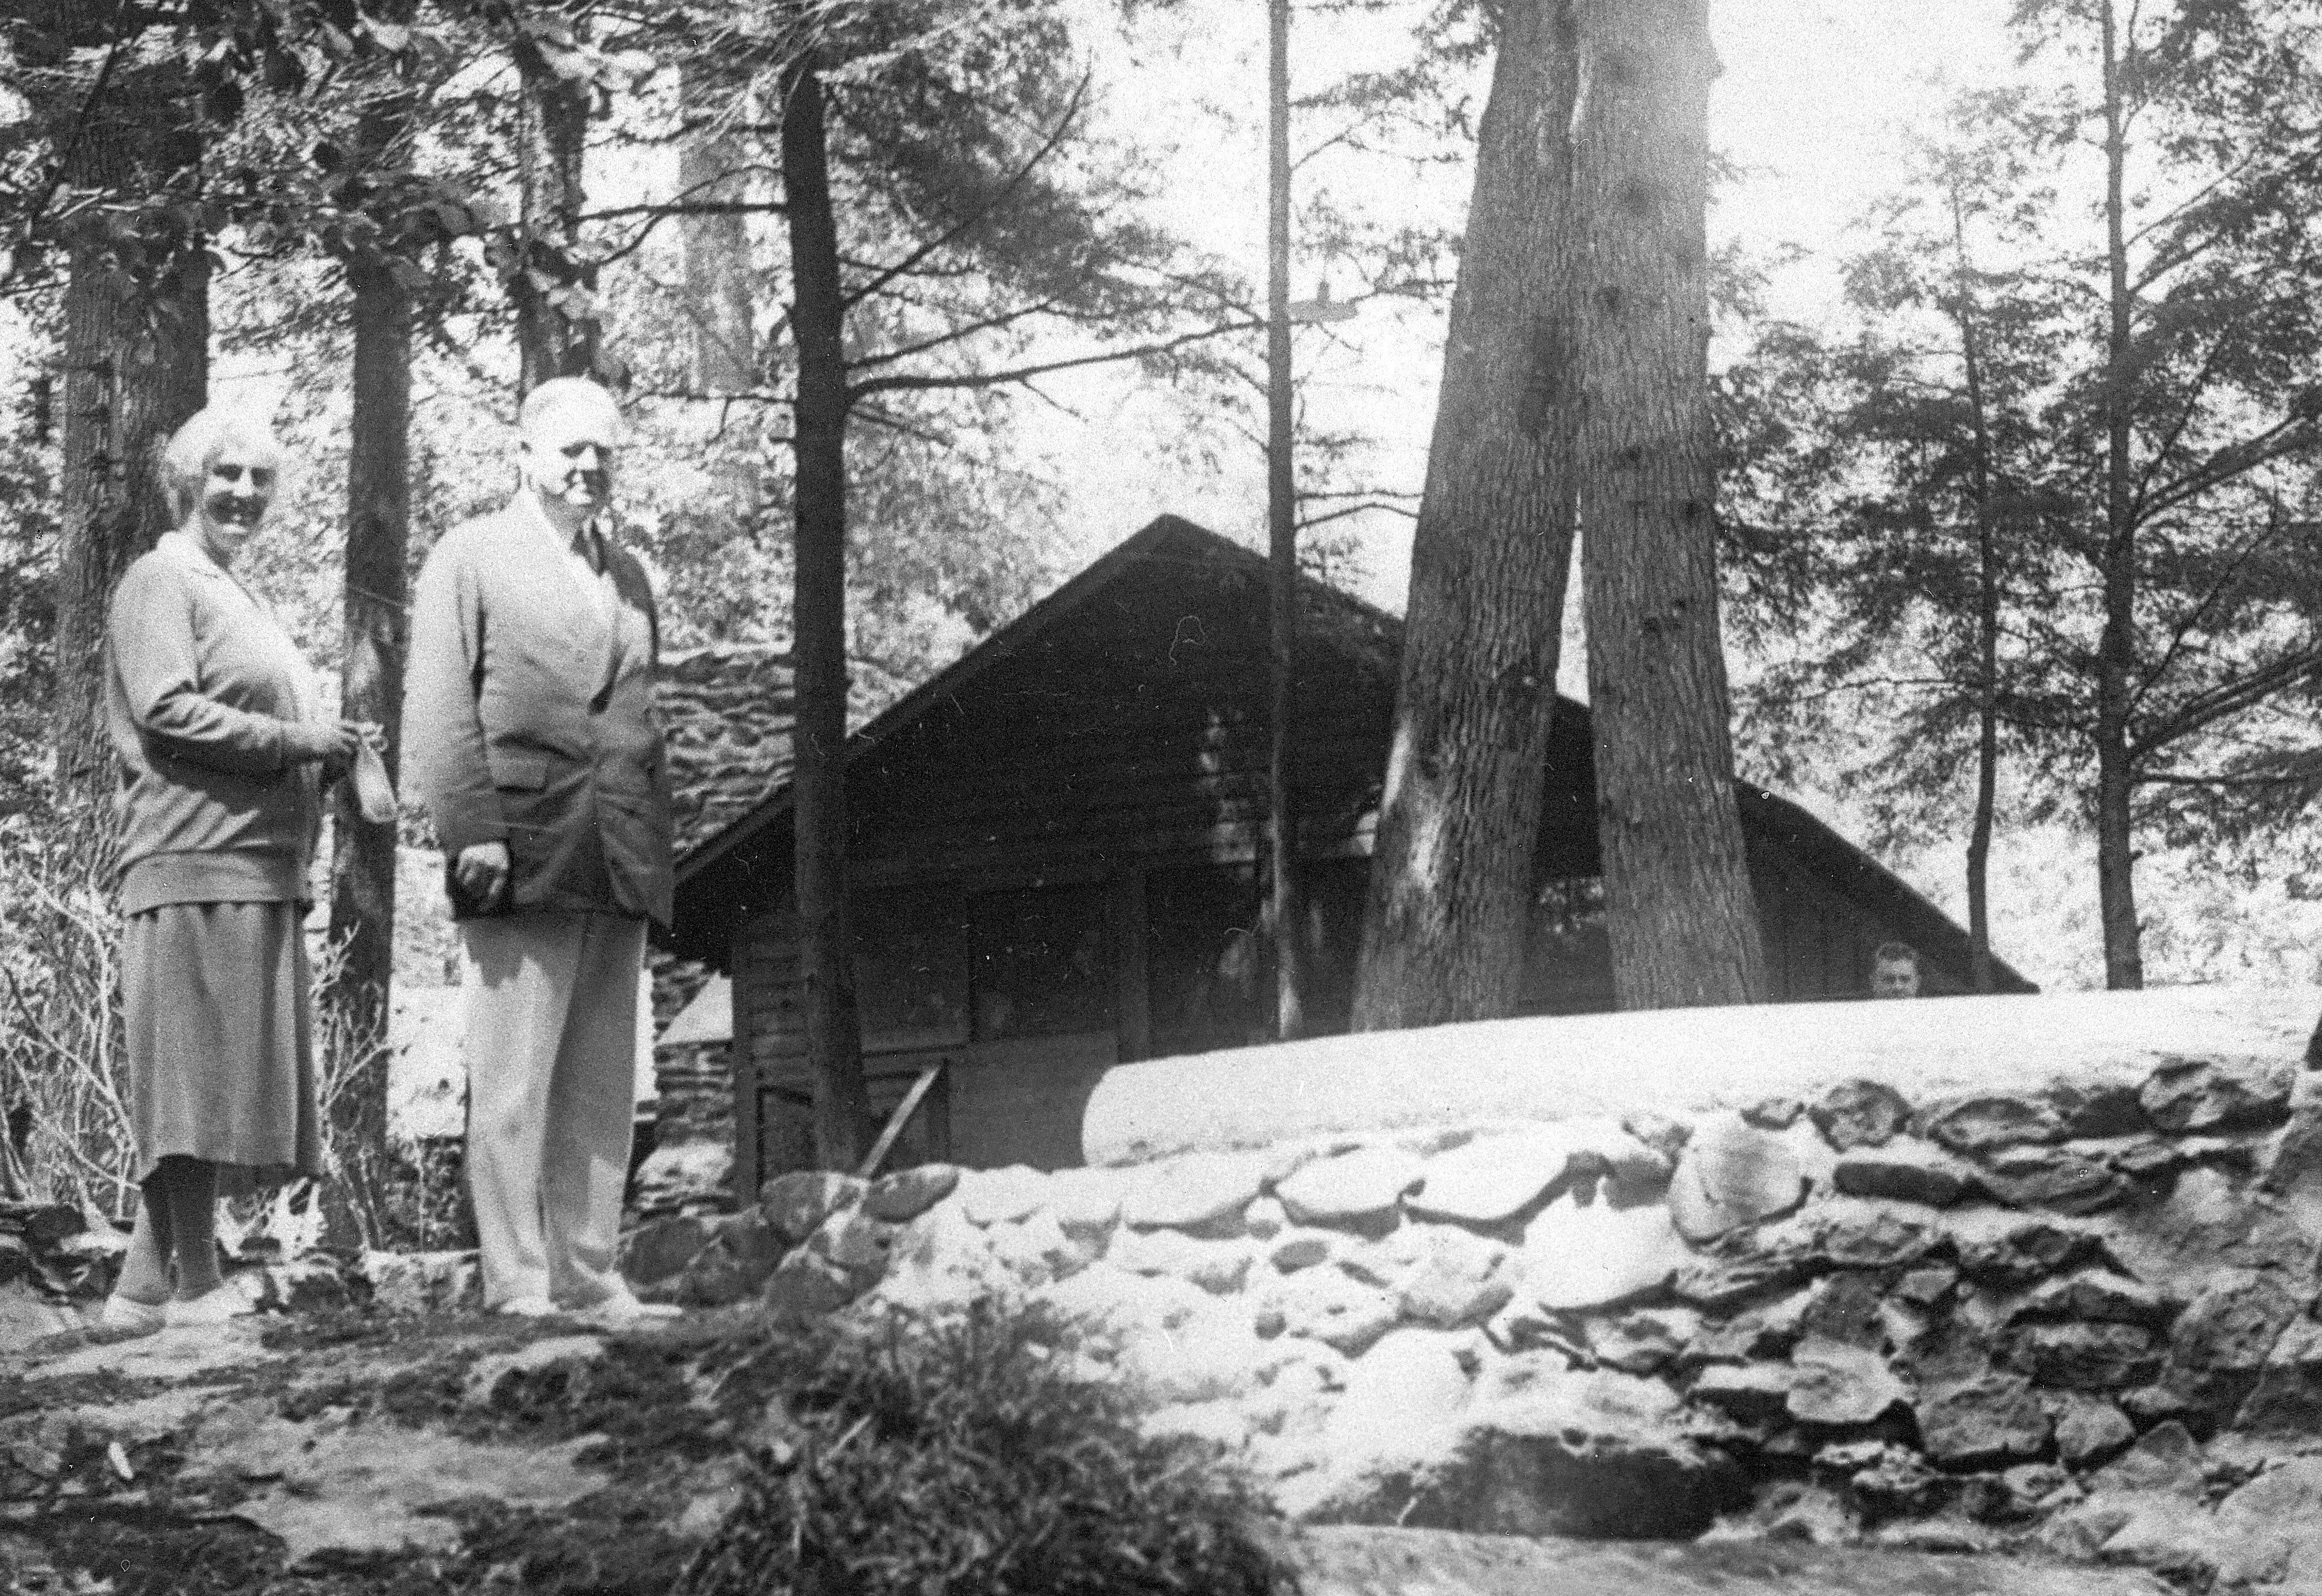 Herbert and Lou Henry Hoover at the Prime Minister's cabin at Rapid Camp.